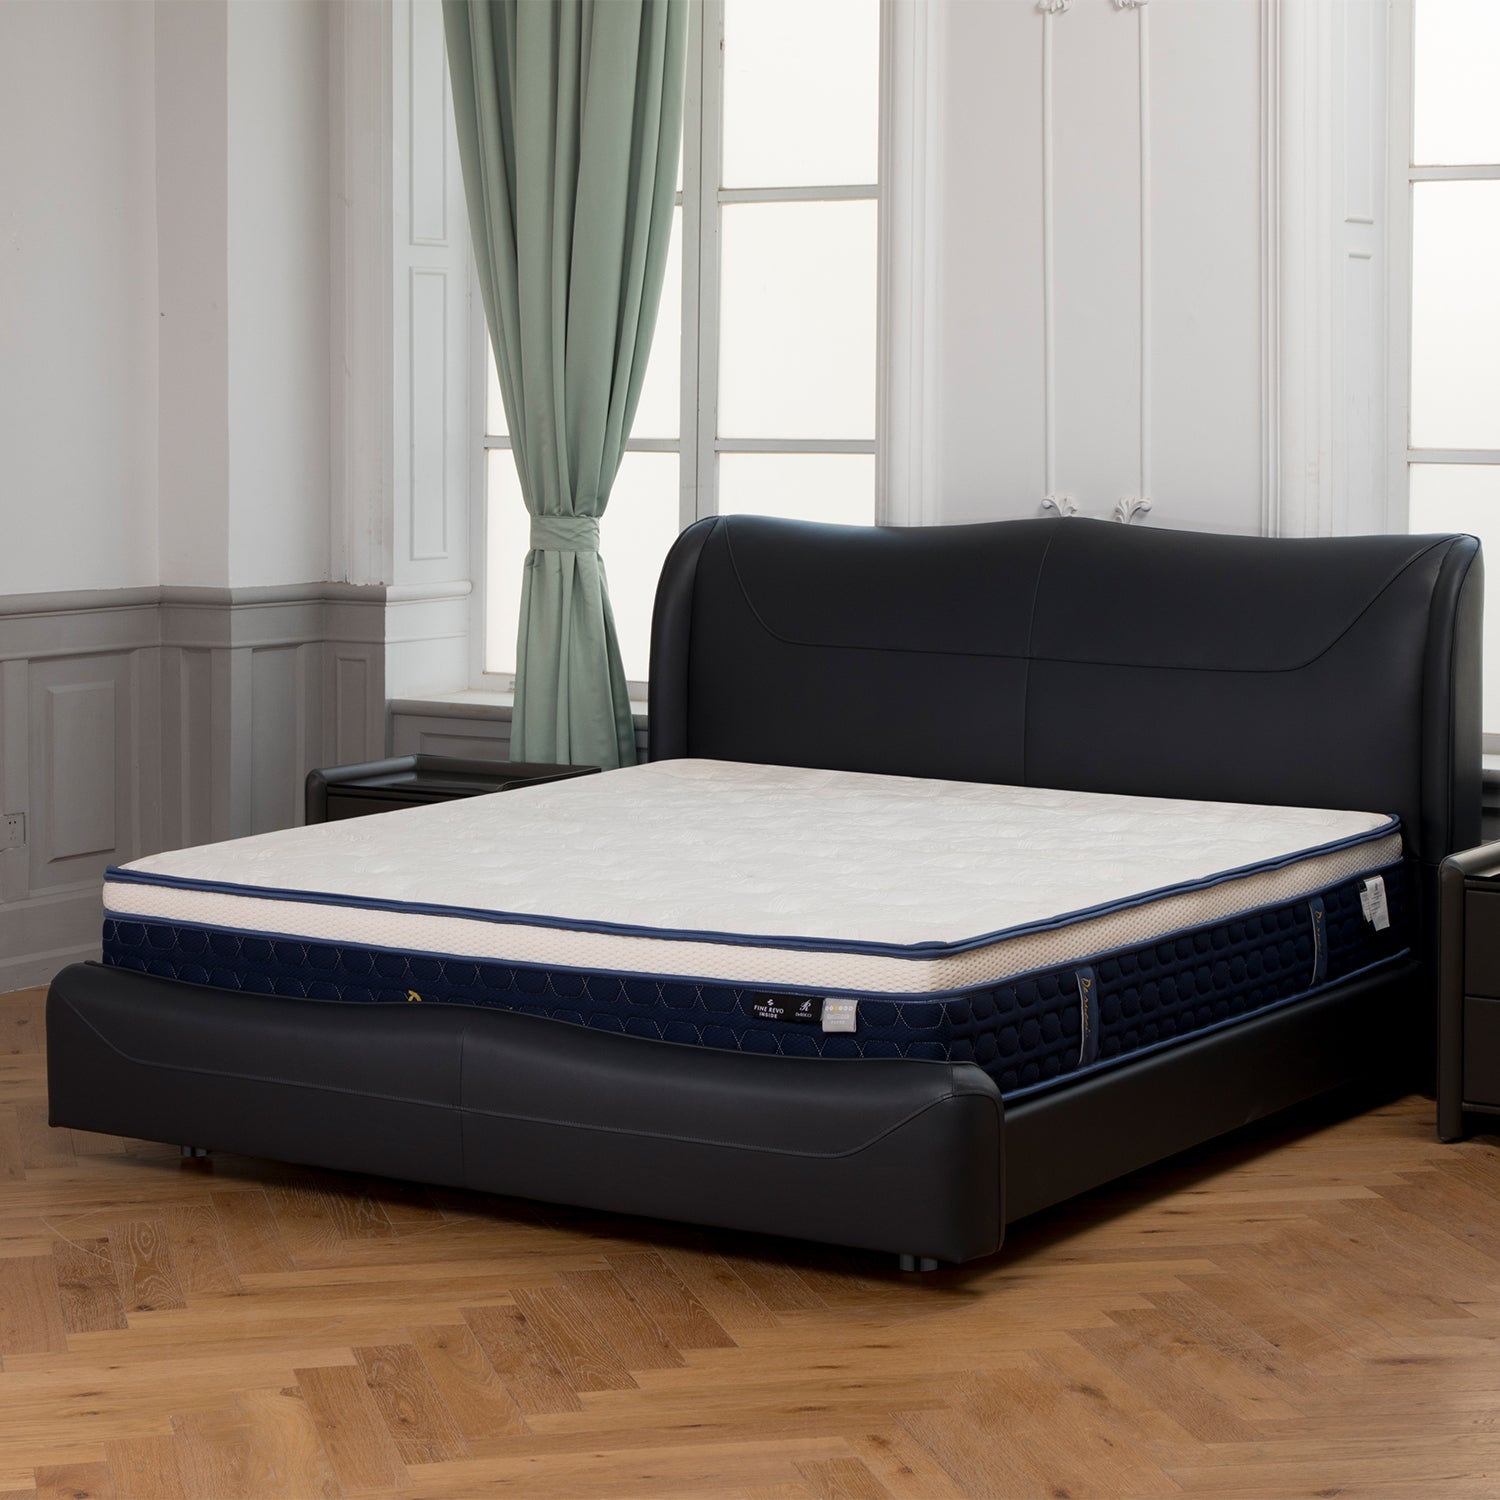 Modern black leather bed frame with padded headboard and deep sea blue bordered mattress in an elegant room with green curtains and wooden flooring.